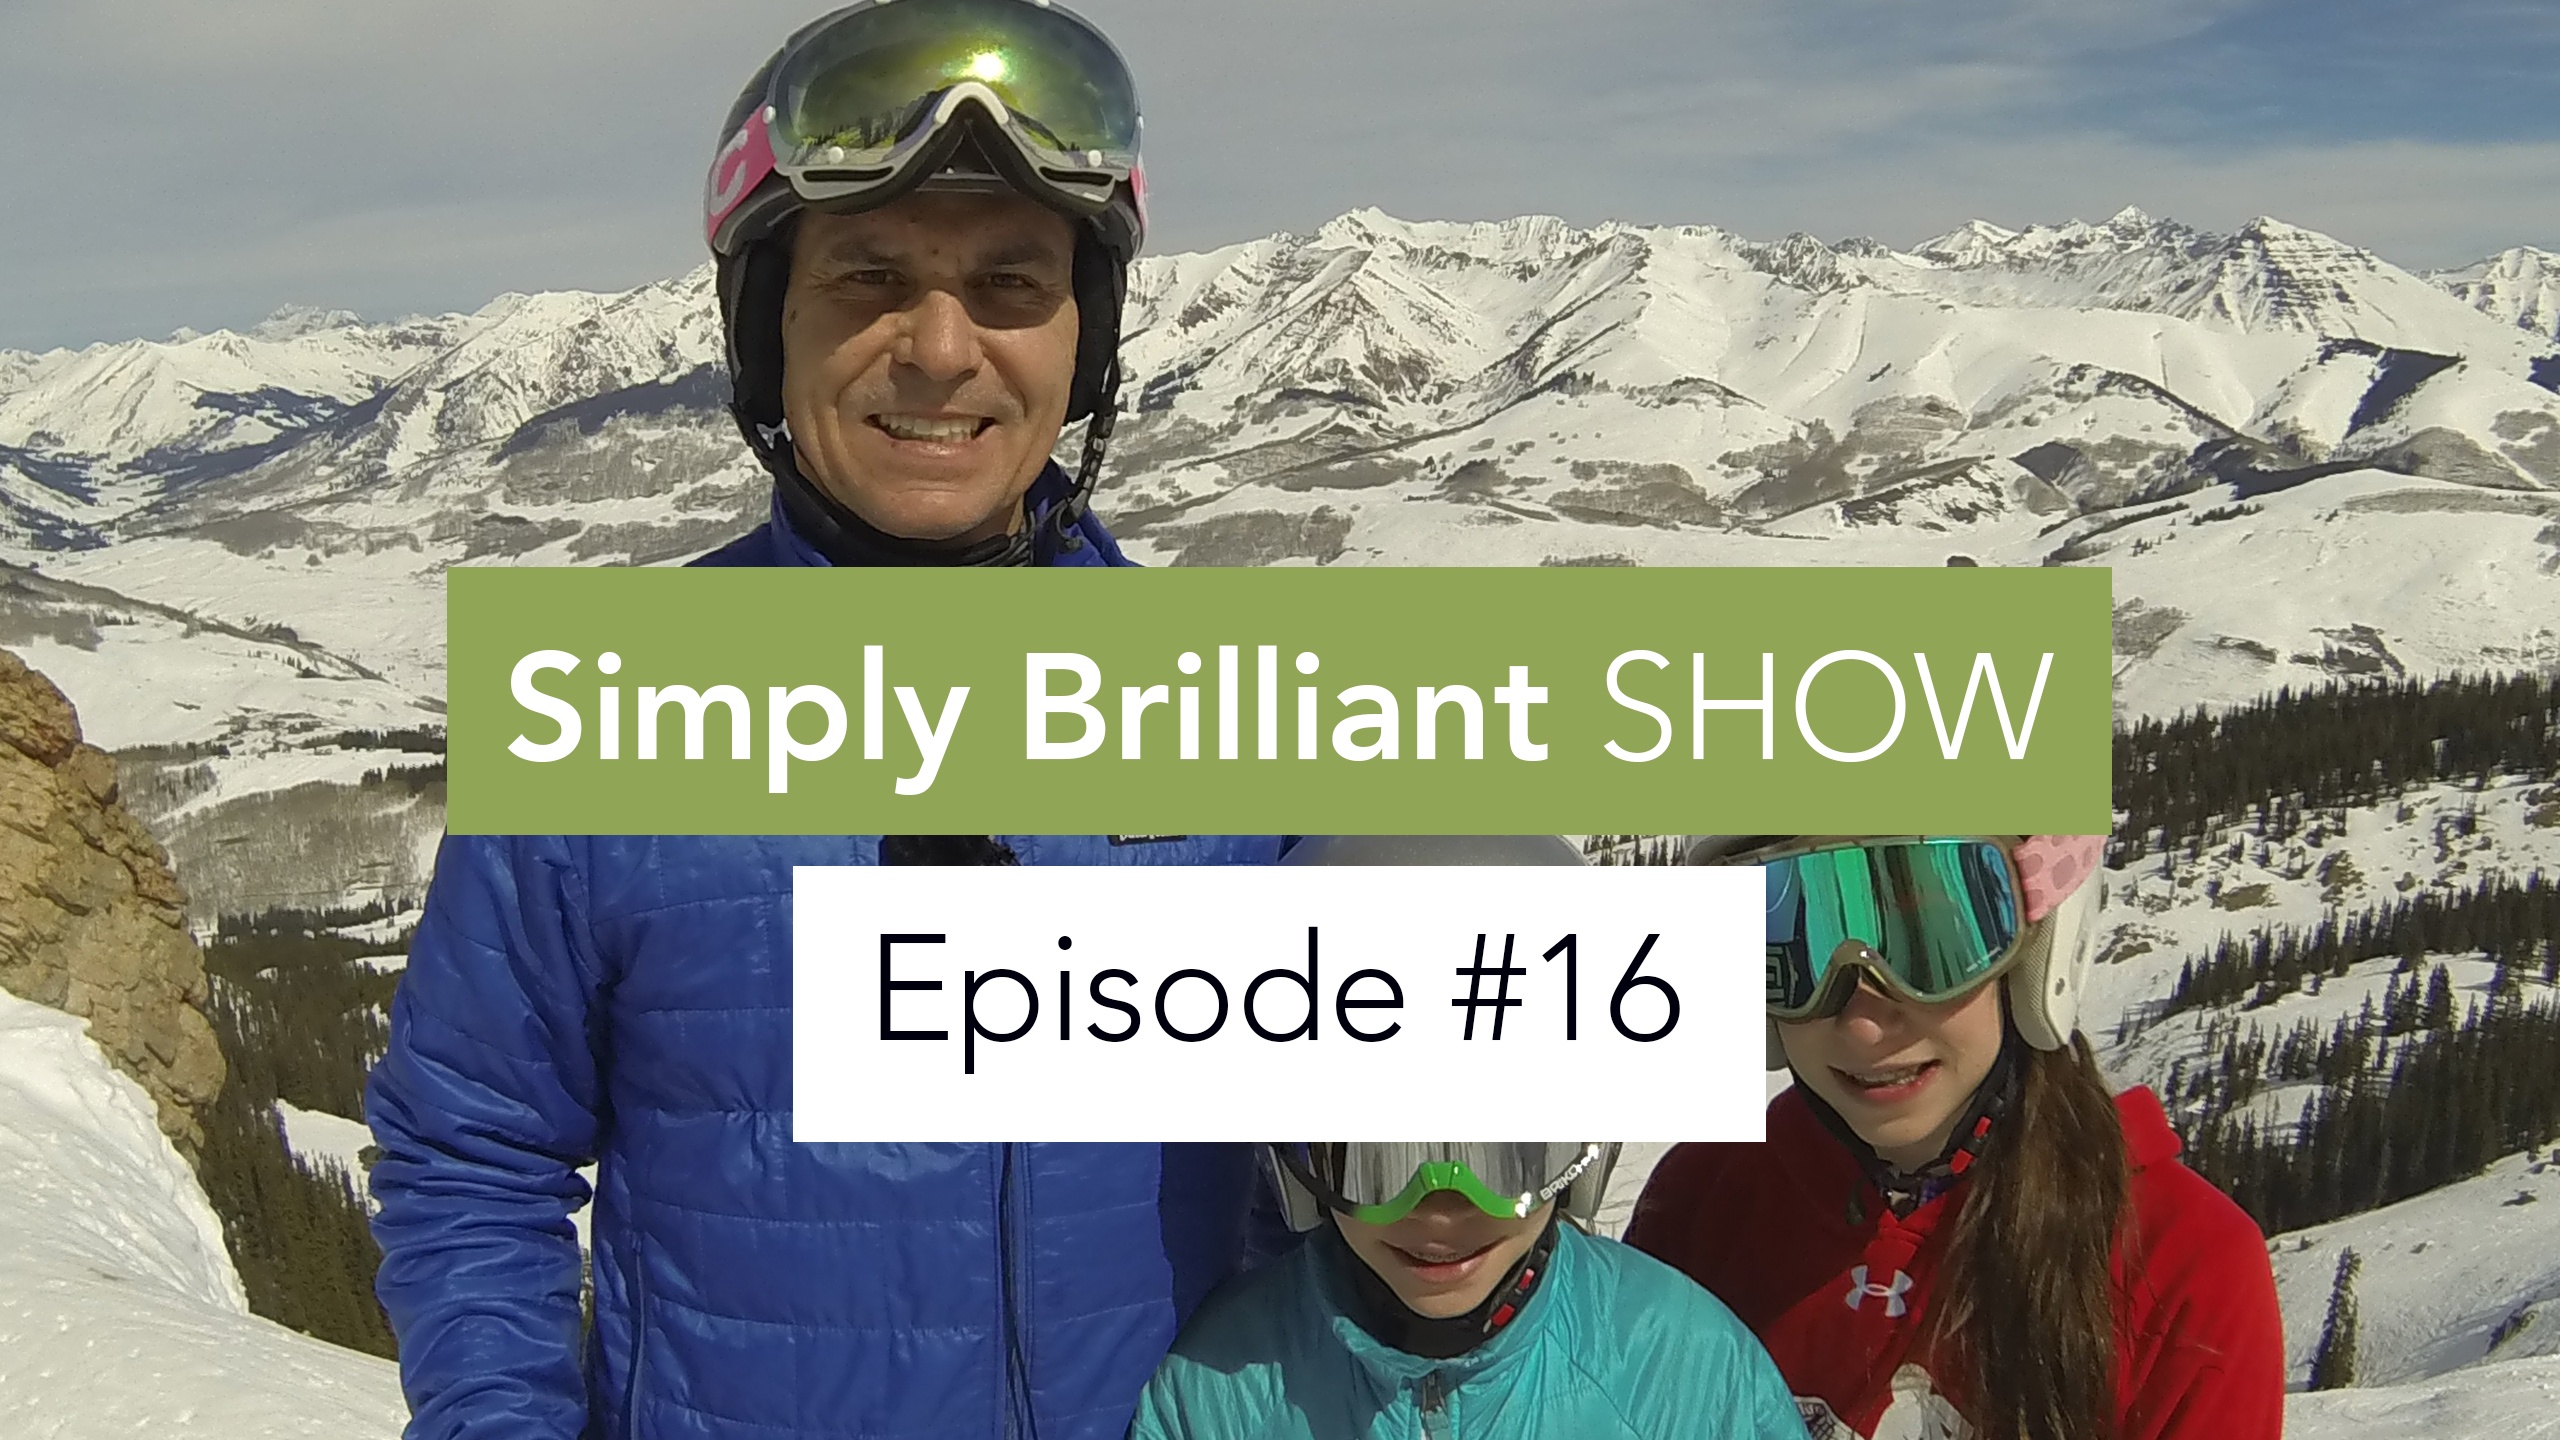 Simply Brilliant Show: Take Yourself Out of the Comfort Zone